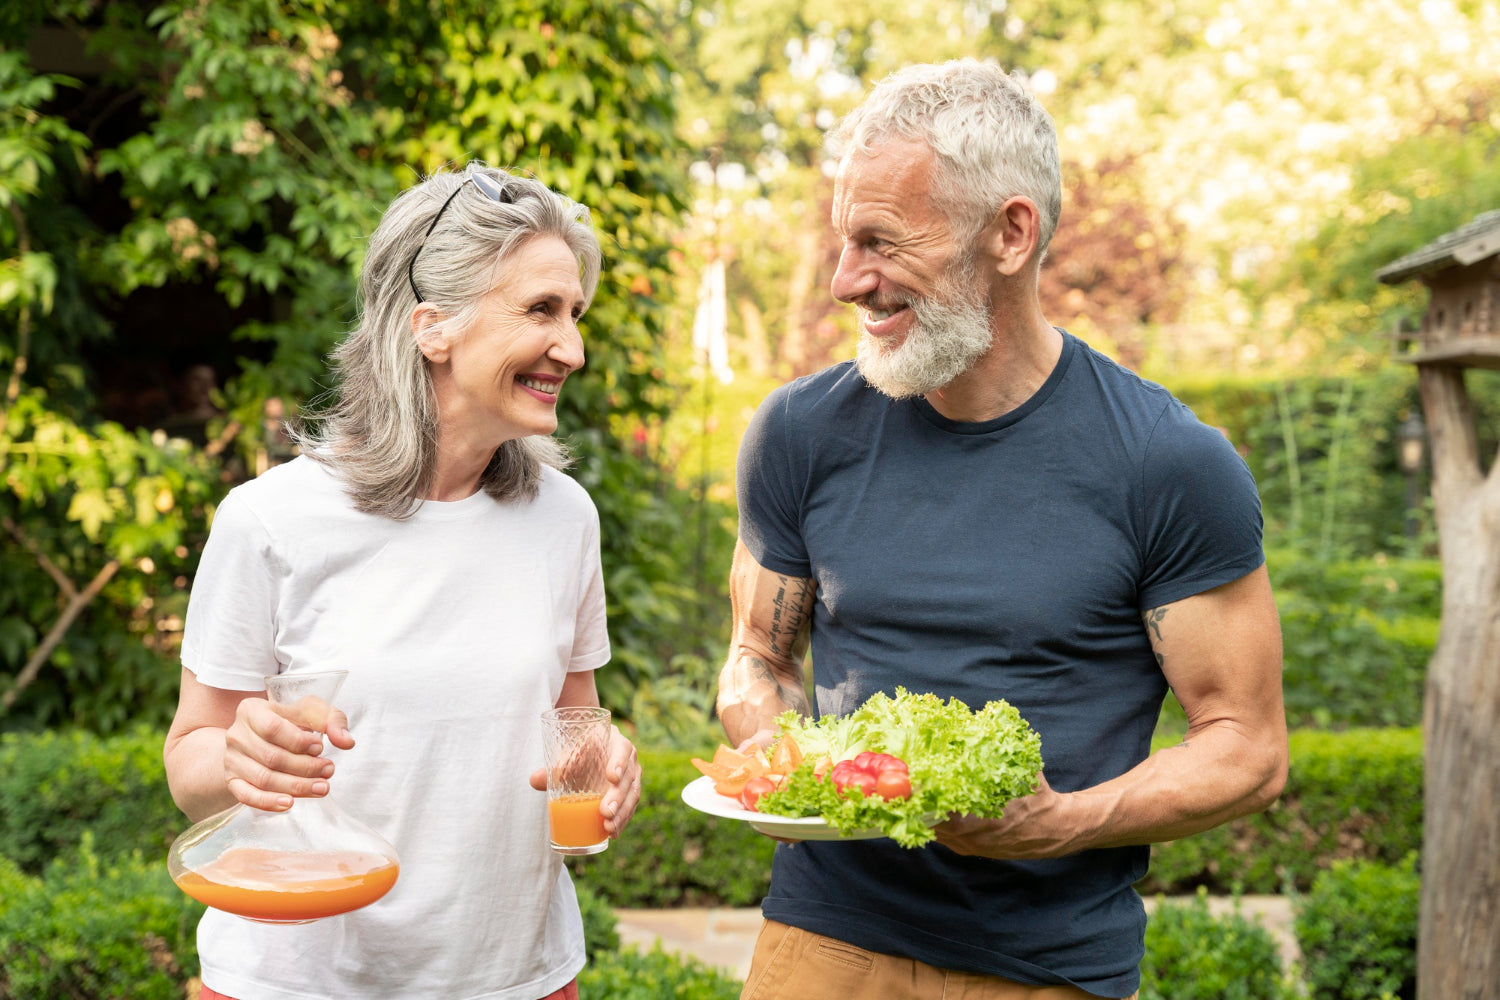 A Guide to Healthy Retirement Lifestyle